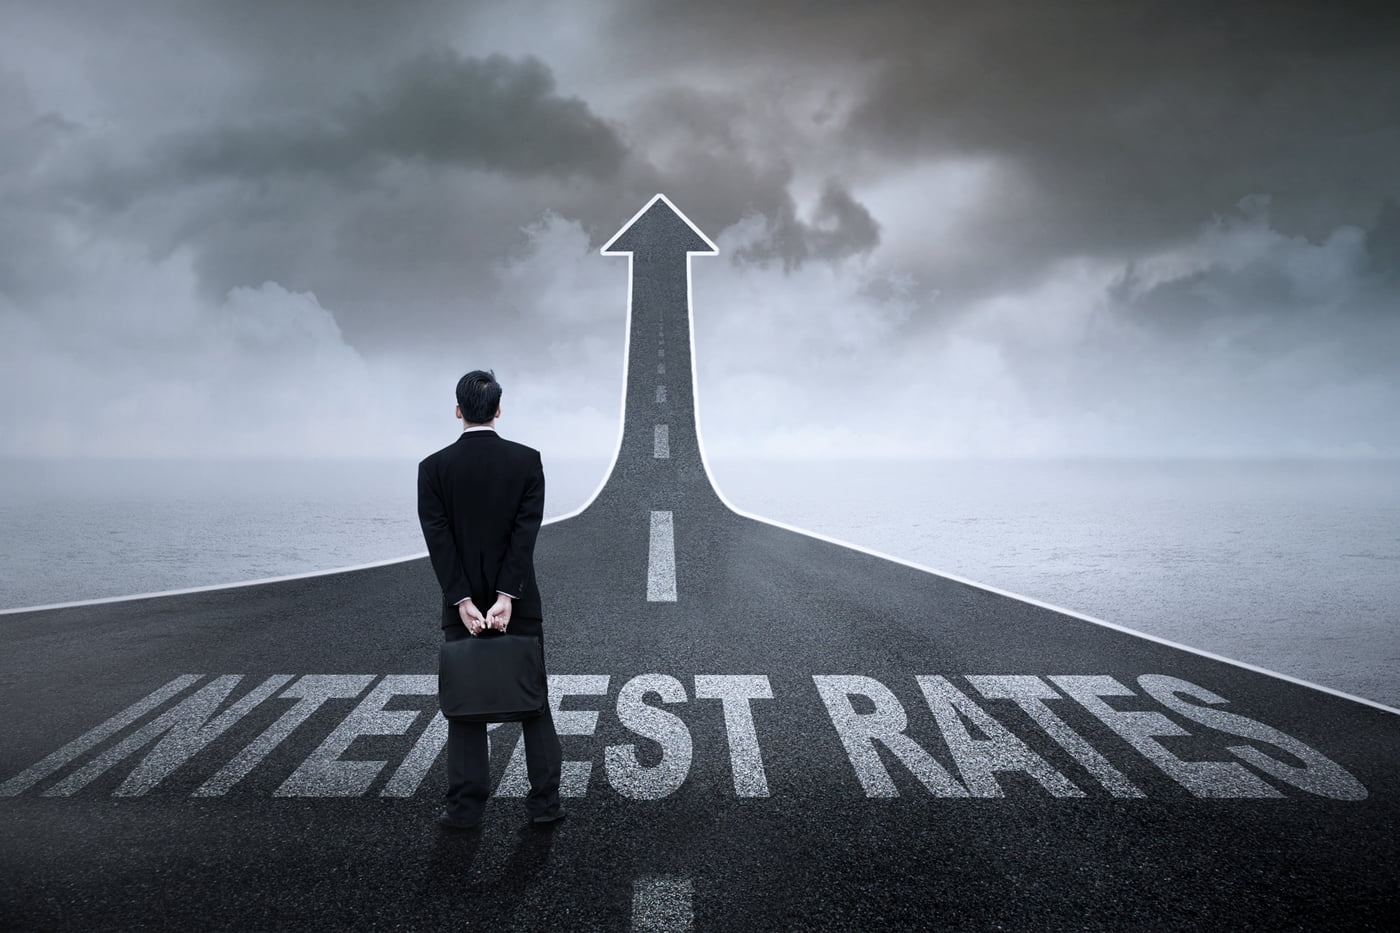 Latest in Mortgage News: Are fixed mortgage rates about to take another leg higher?